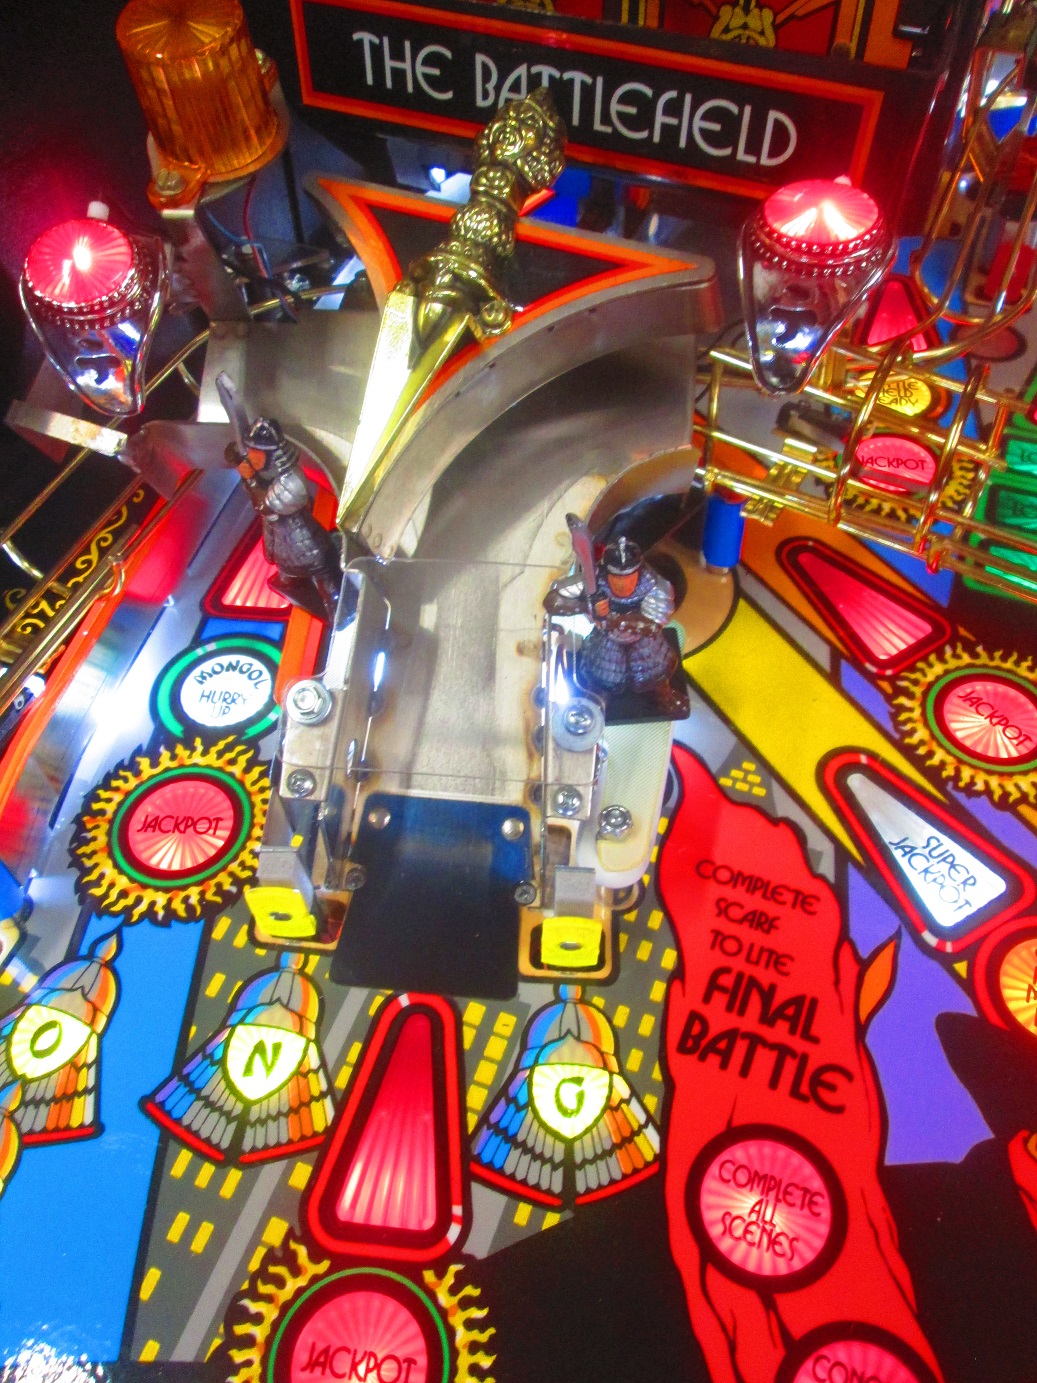 Toys like the diverter-driven ramps make this game a favorite among pinball pros and novices alike.